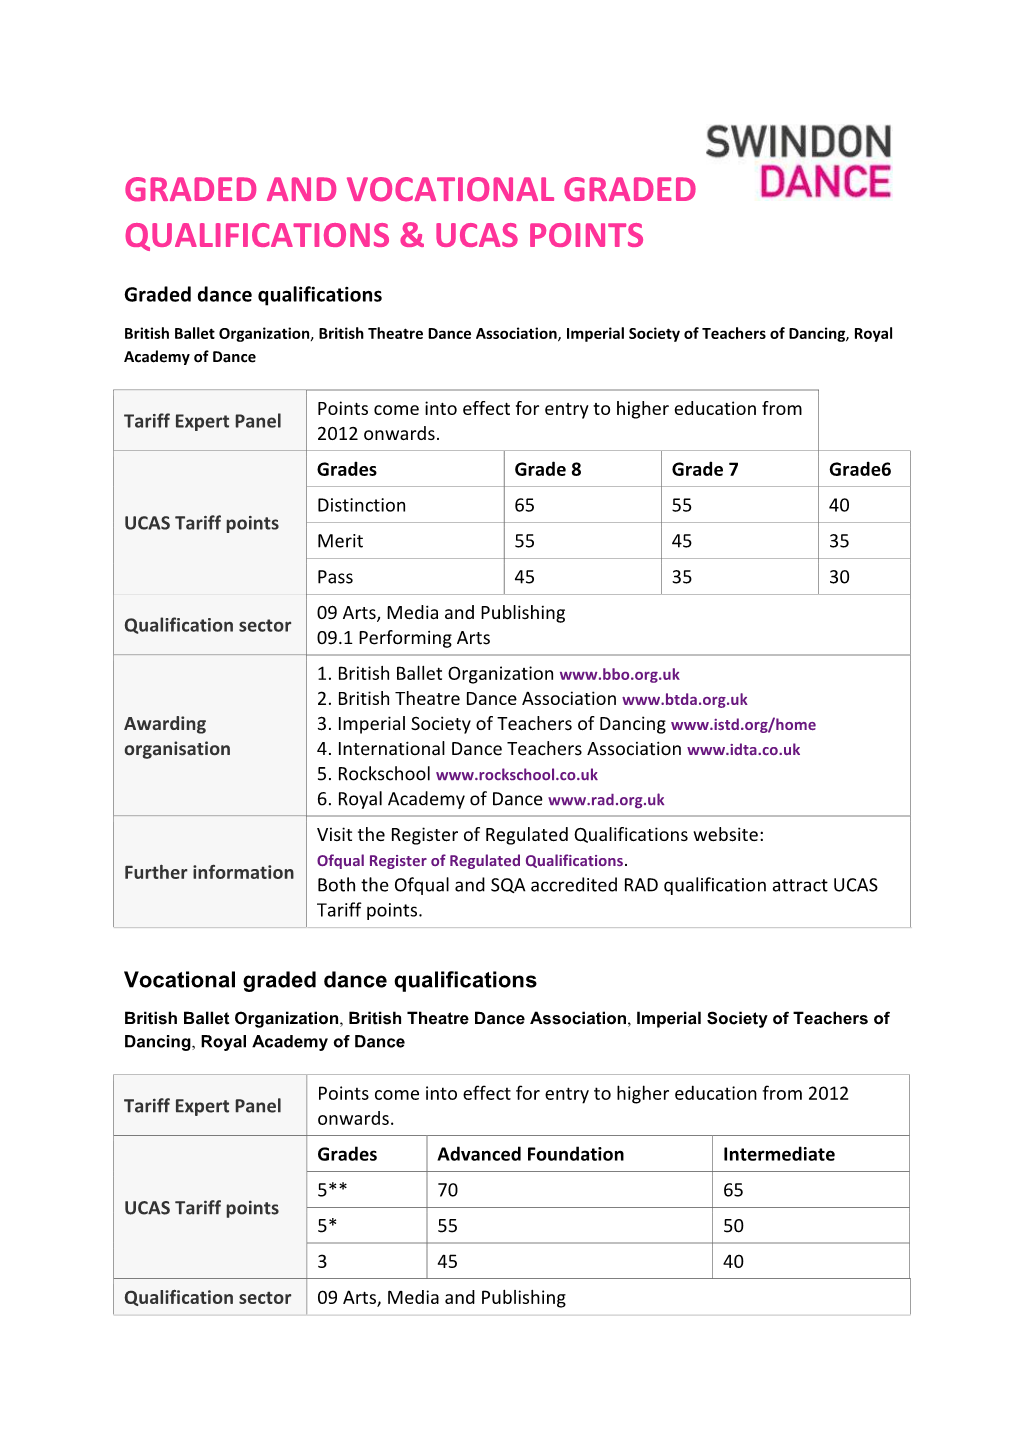 Graded and Vocational Graded Qualifications & Ucas Points